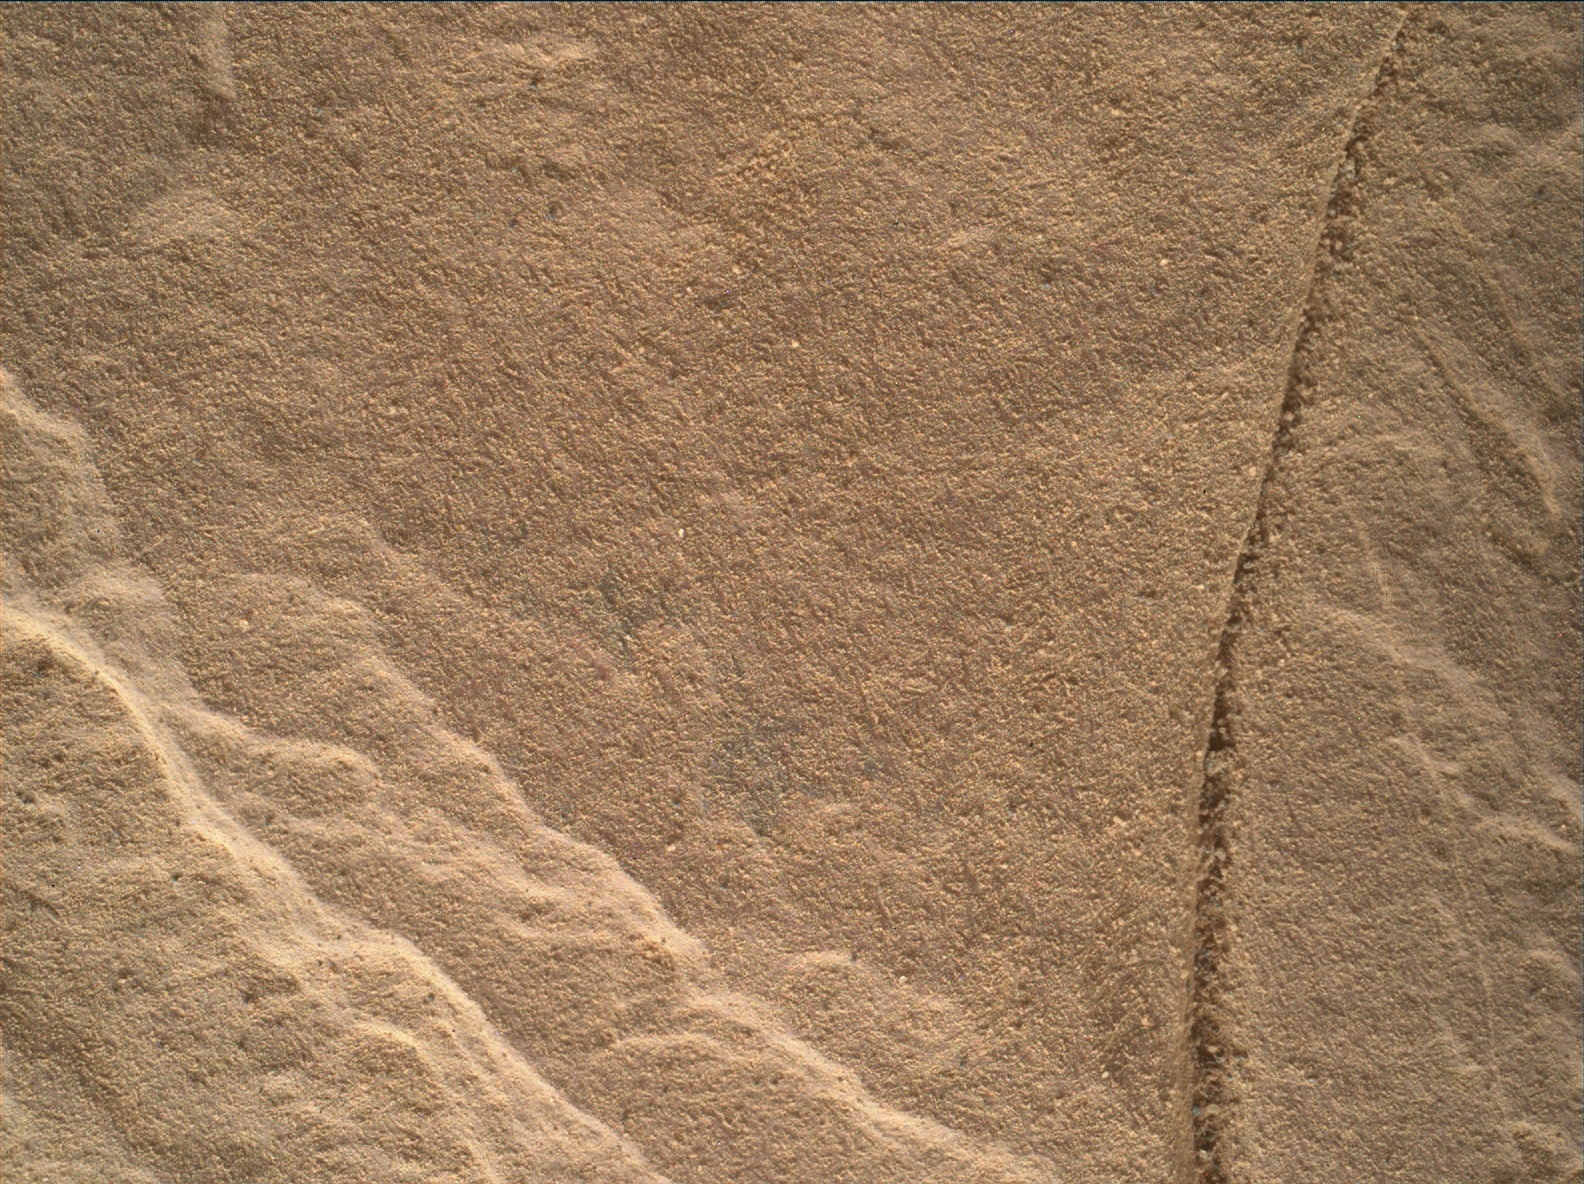 Nasa's Mars rover Curiosity acquired this image using its Mars Hand Lens Imager (MAHLI) on Sol 2005